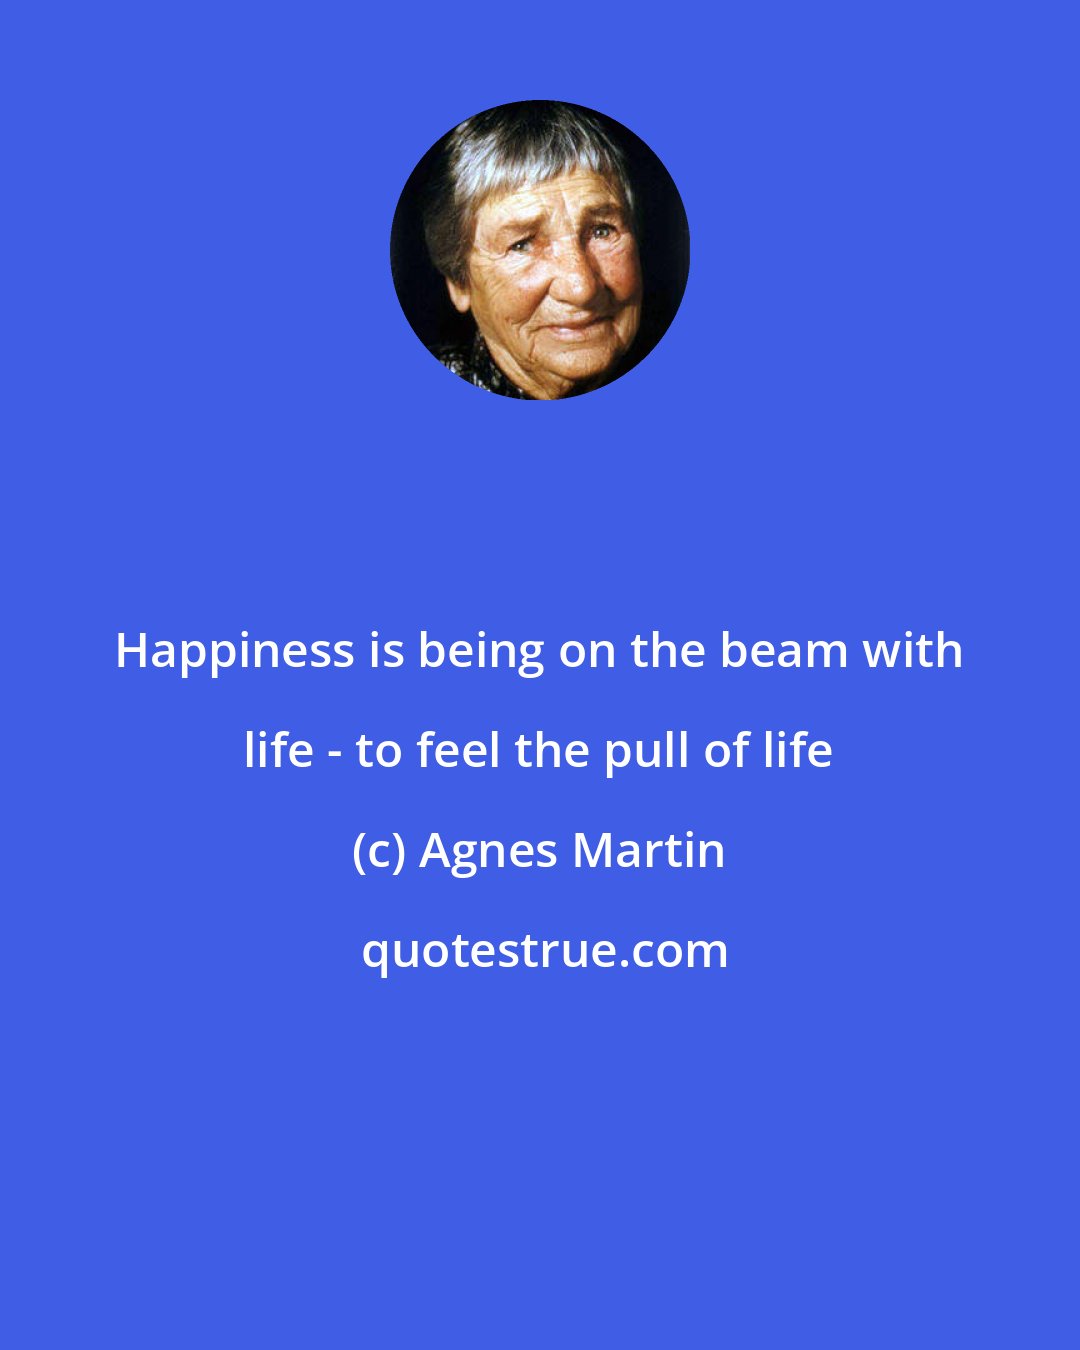 Agnes Martin: Happiness is being on the beam with life - to feel the pull of life